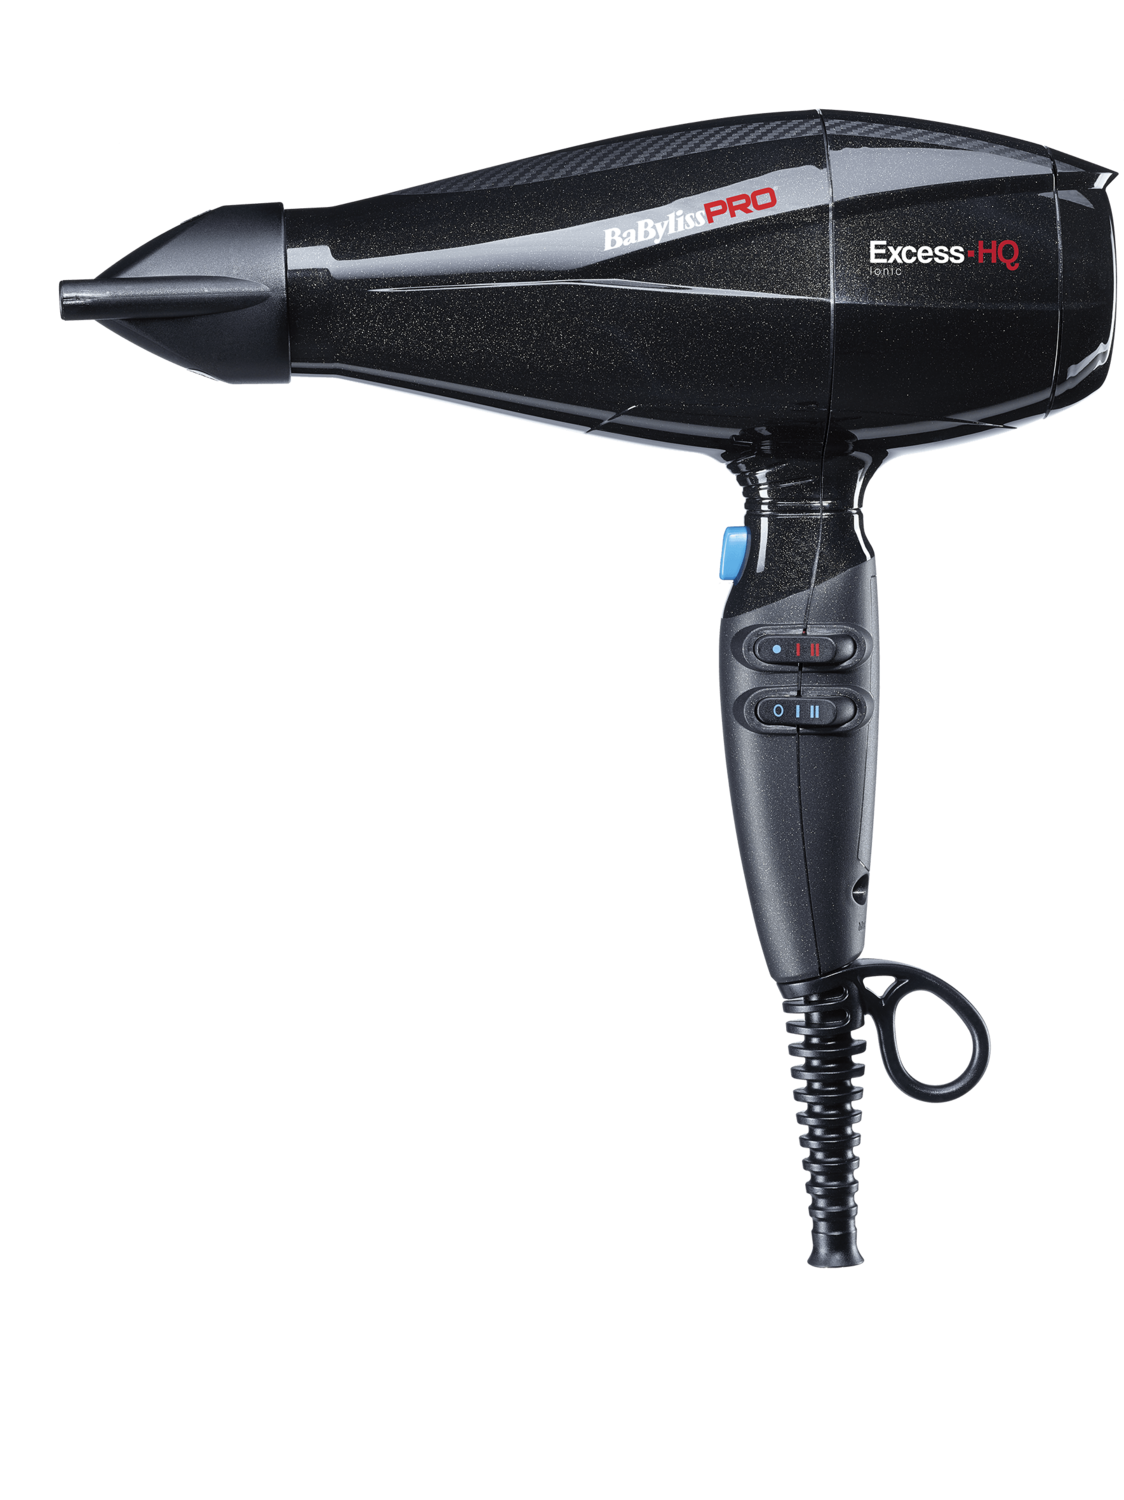 SECADOR BABYLISS EXCESS-HQ HAIRDRYER 2600 IONIC